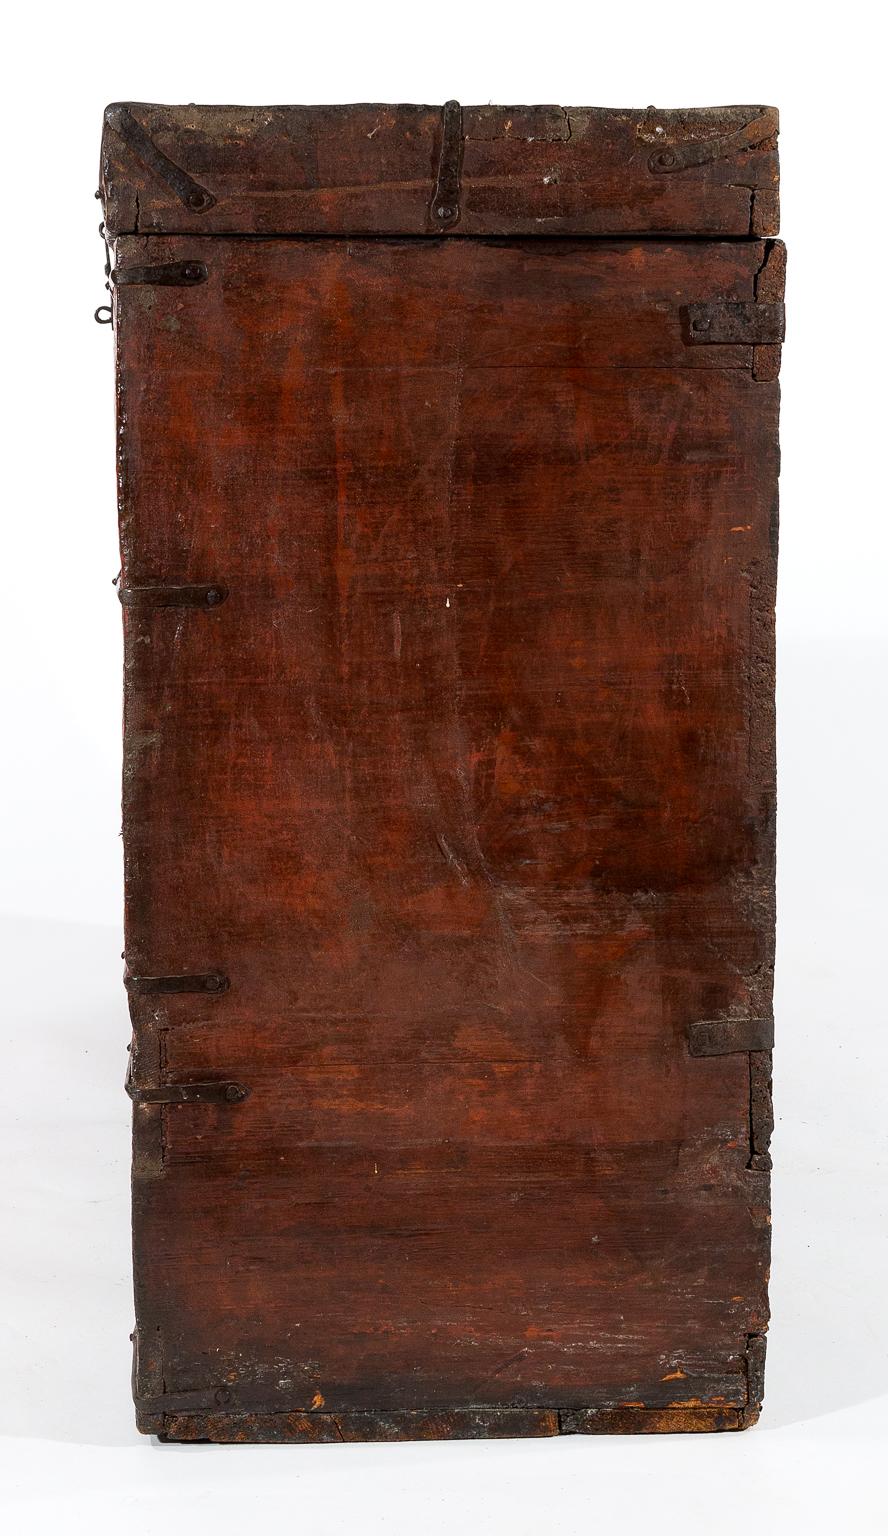 This antique Tibetan chest was made for use in a monastery and would make a wonderful console or side table. Made from hand planed wood with hand forged iron details. What makes it really special and rare is its original paint which was made from